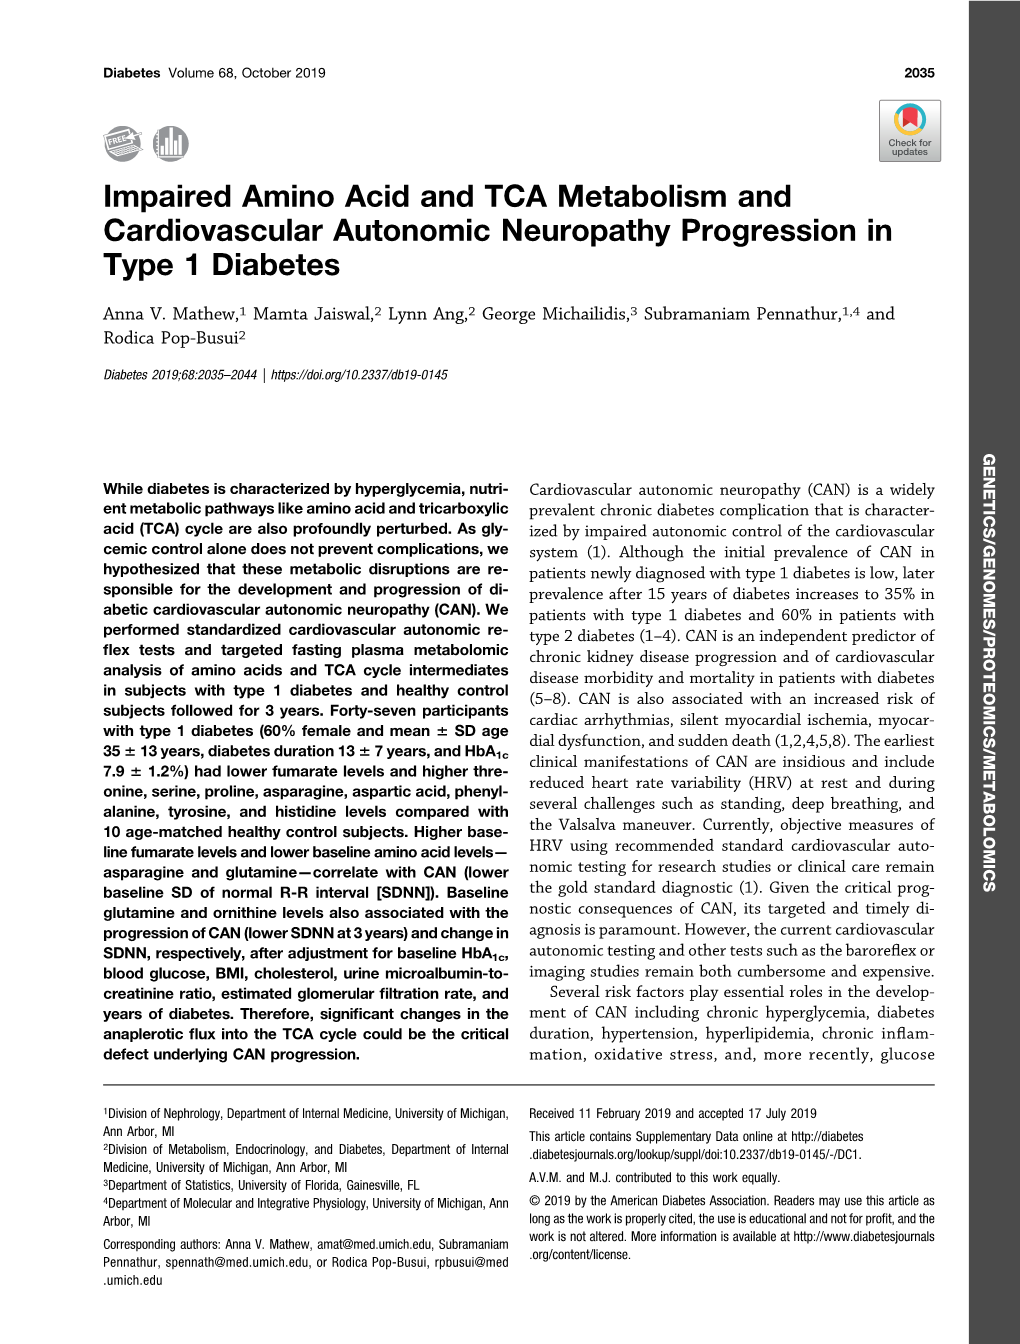 Impaired Amino Acid and TCA Metabolism and Cardiovascular Autonomic Neuropathy Progression in Type 1 Diabetes